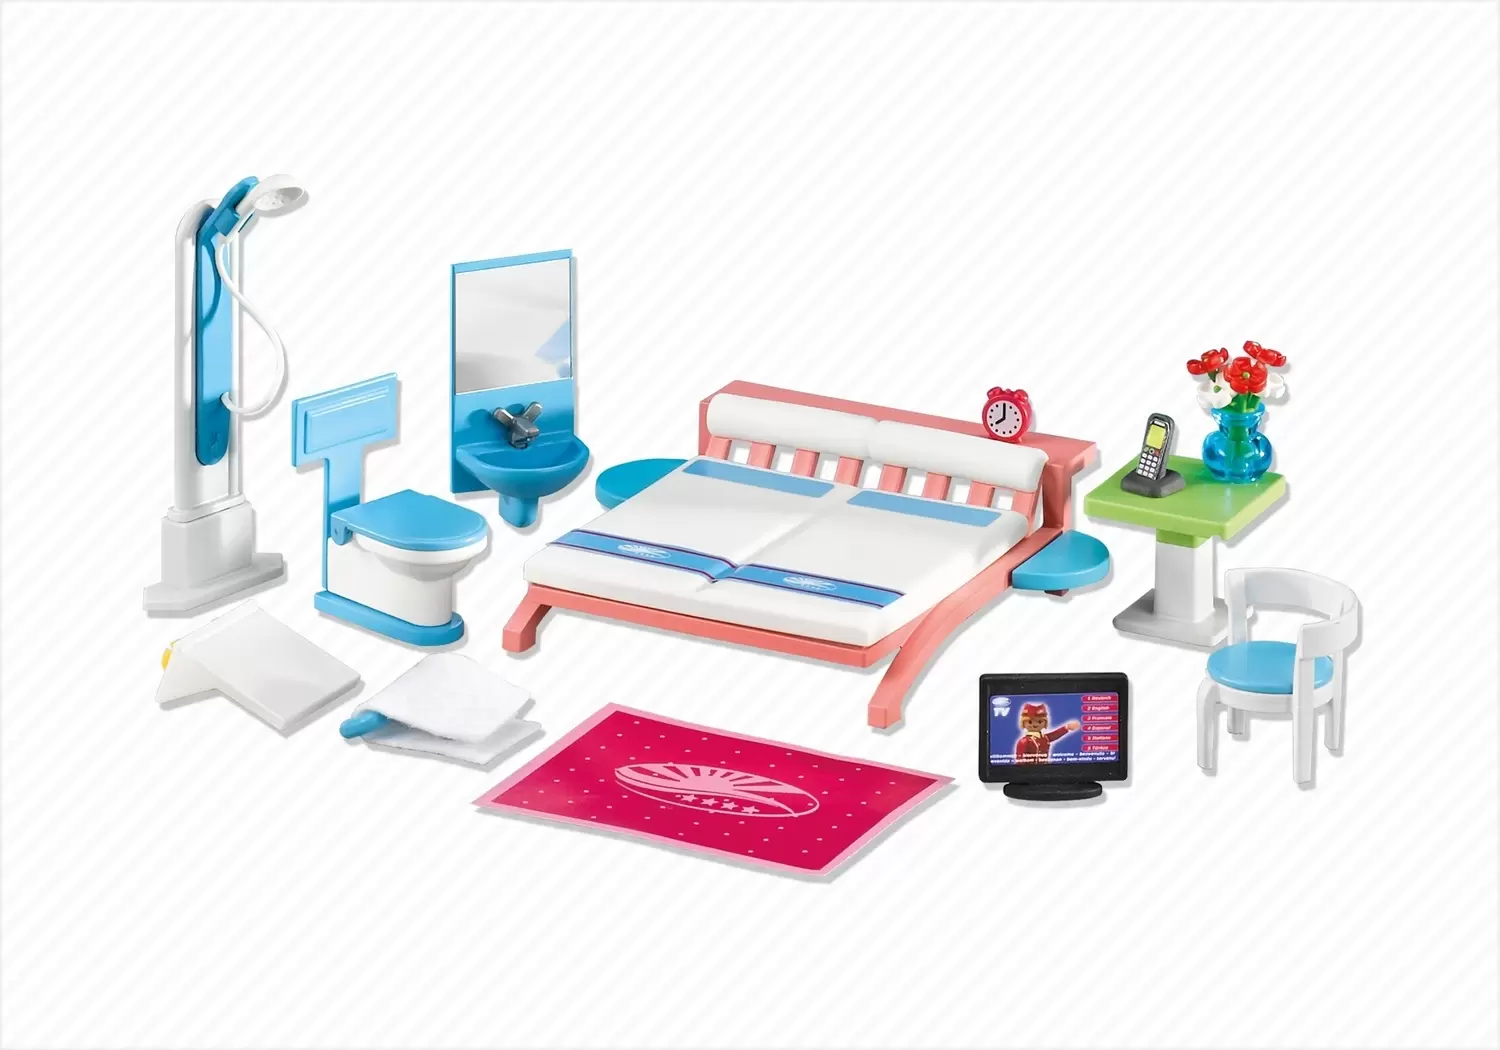 Playmobil Accessories & decorations - Large hotel room accessories